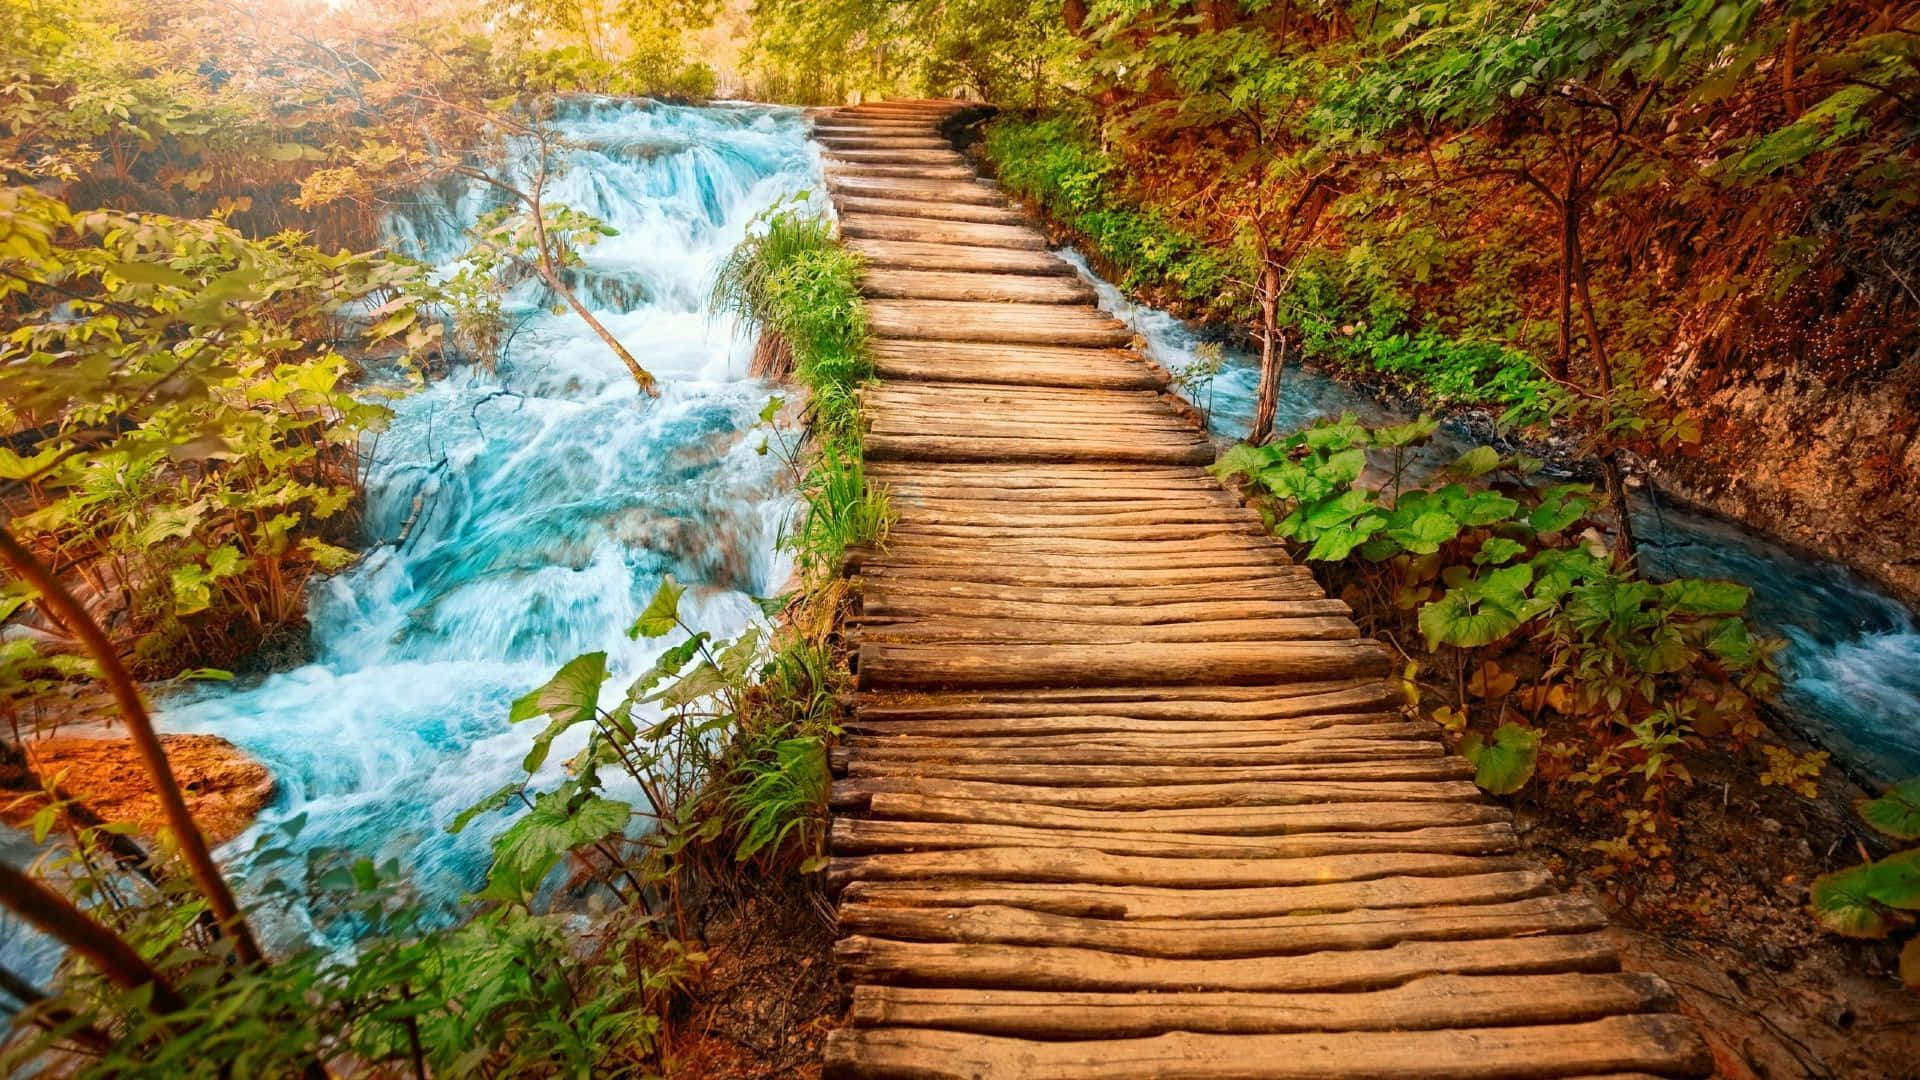 1920x1080 Hd Fall Wooden Bridge Middle Of Forest Wallpaper